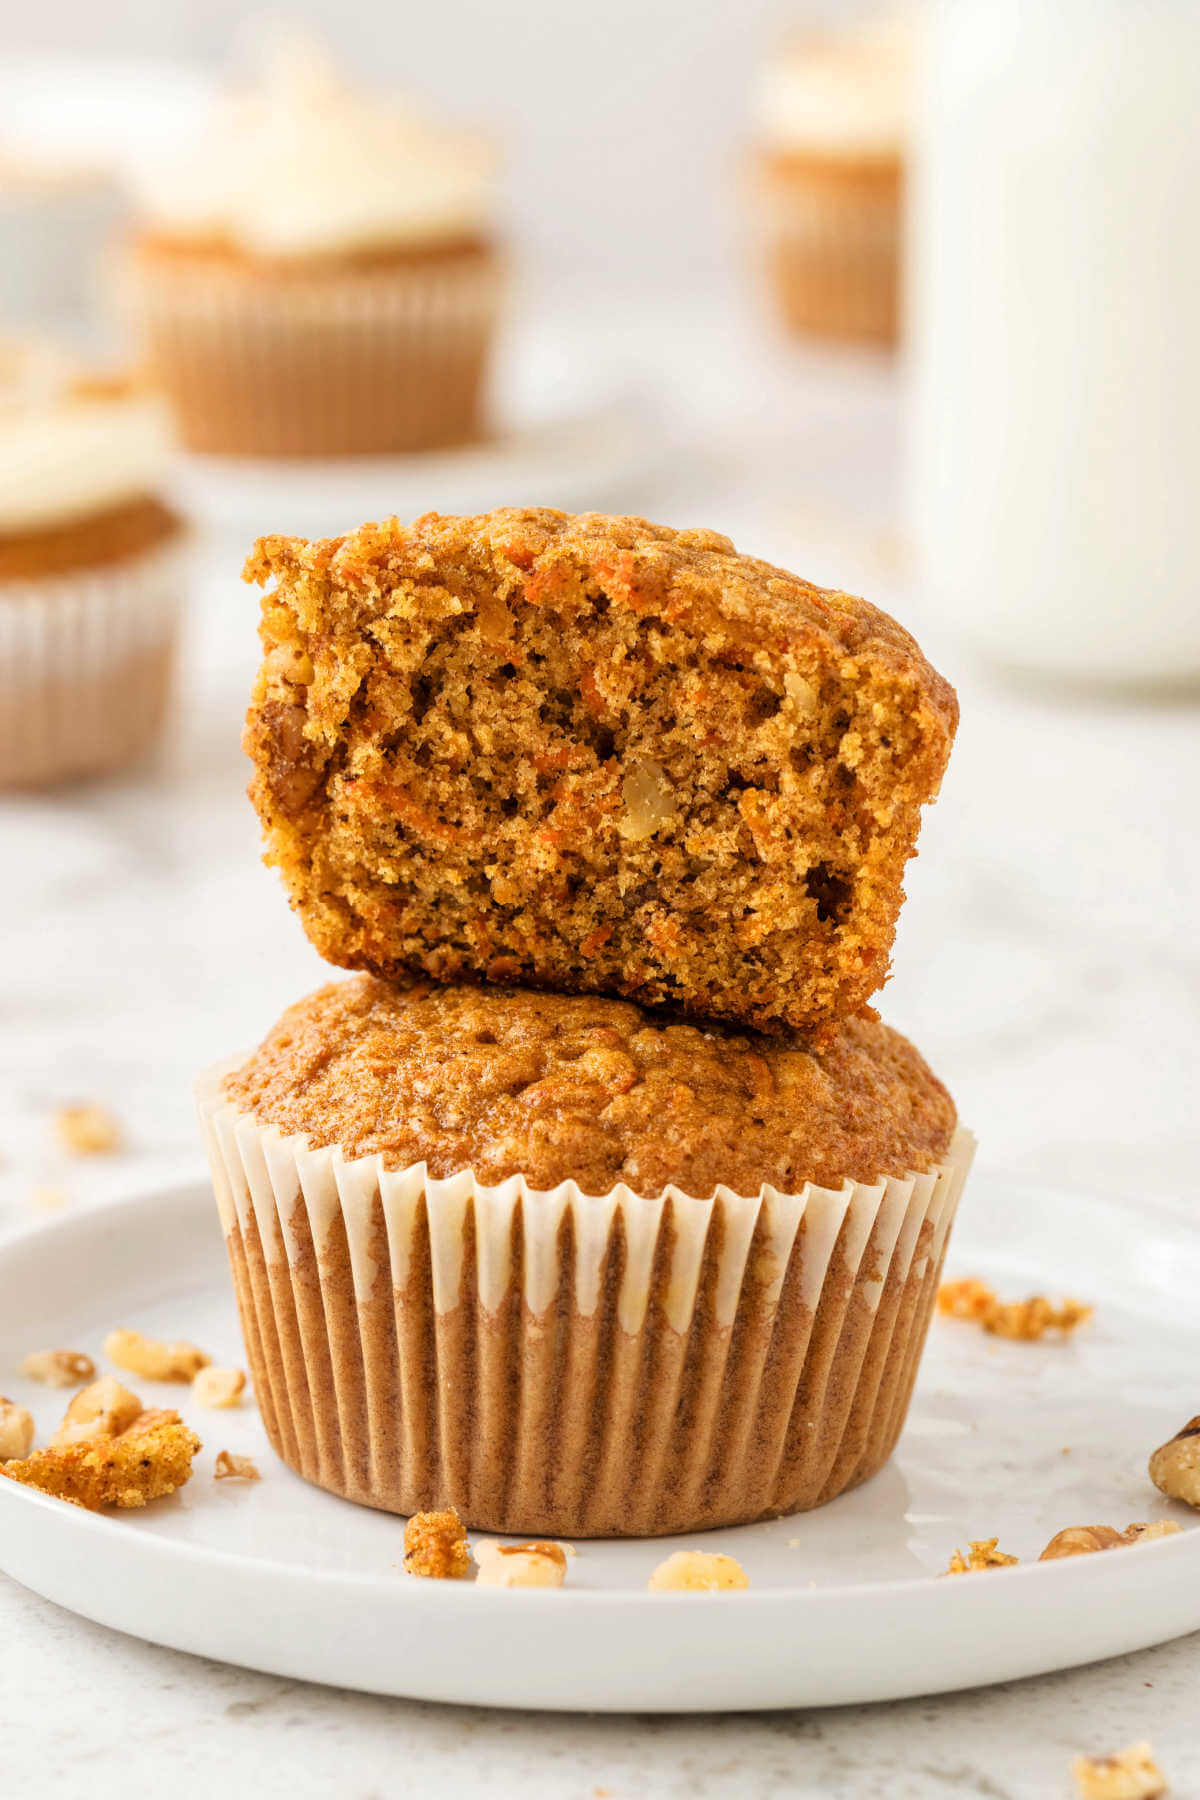 unfrosted carrot cake muffins stacked on top of each other with one cut in half to show the interior.